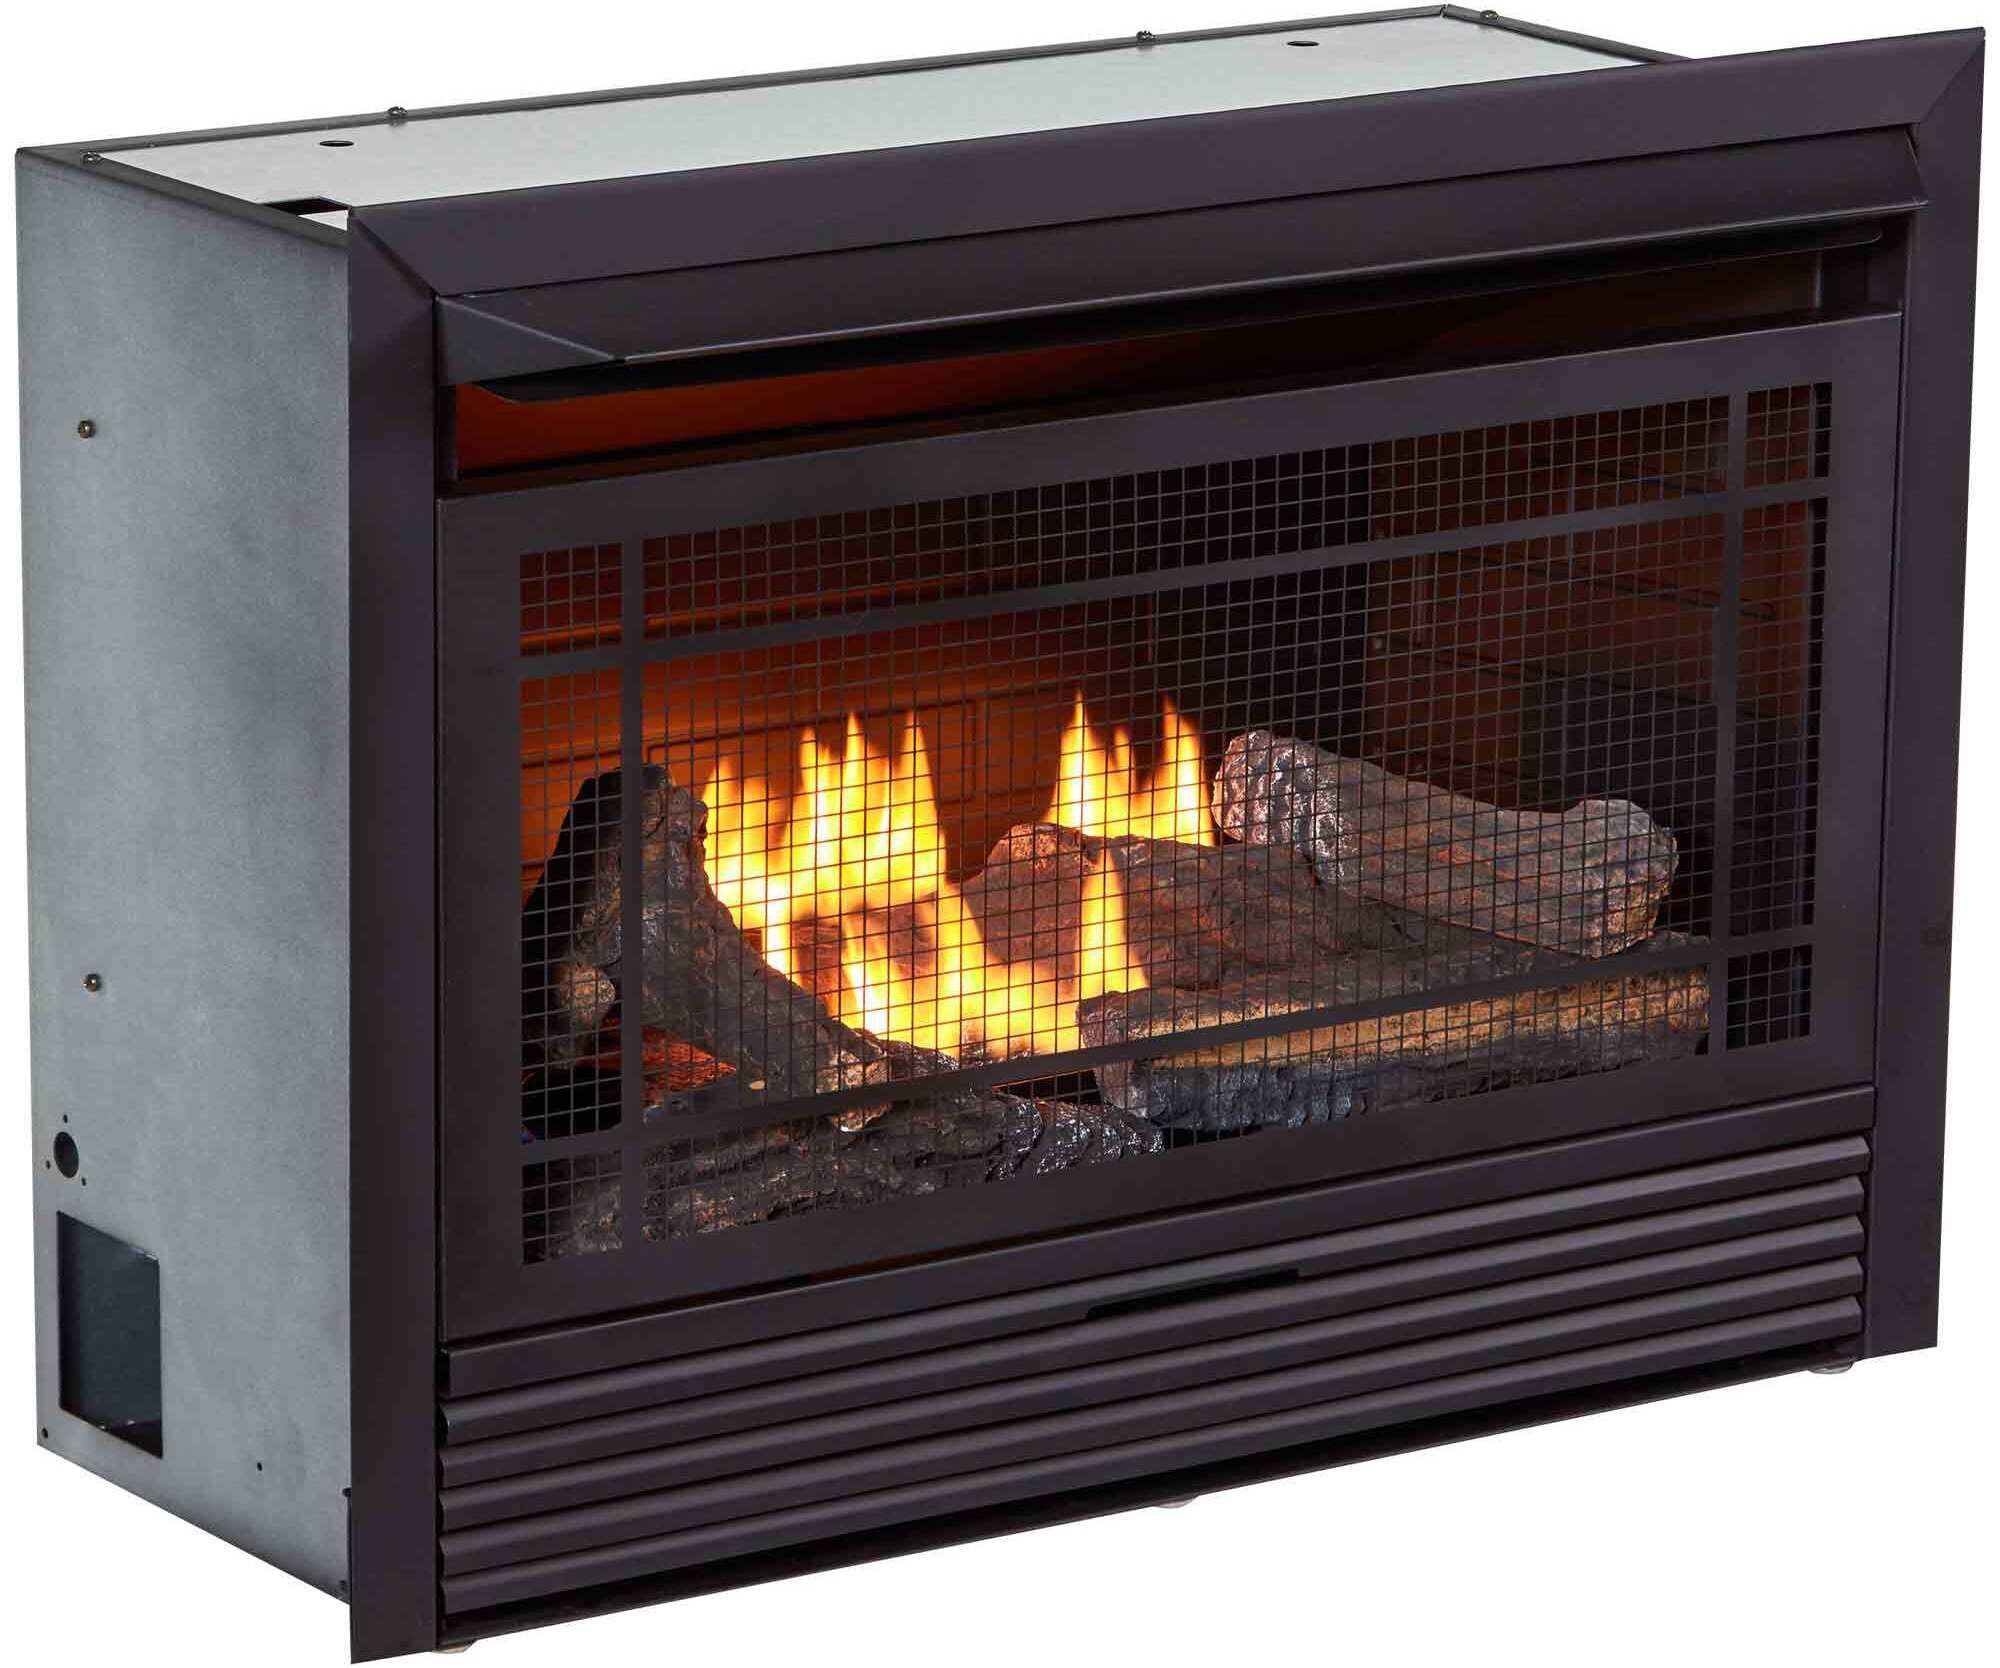 Where To Buy A Gas Fireplace Insert